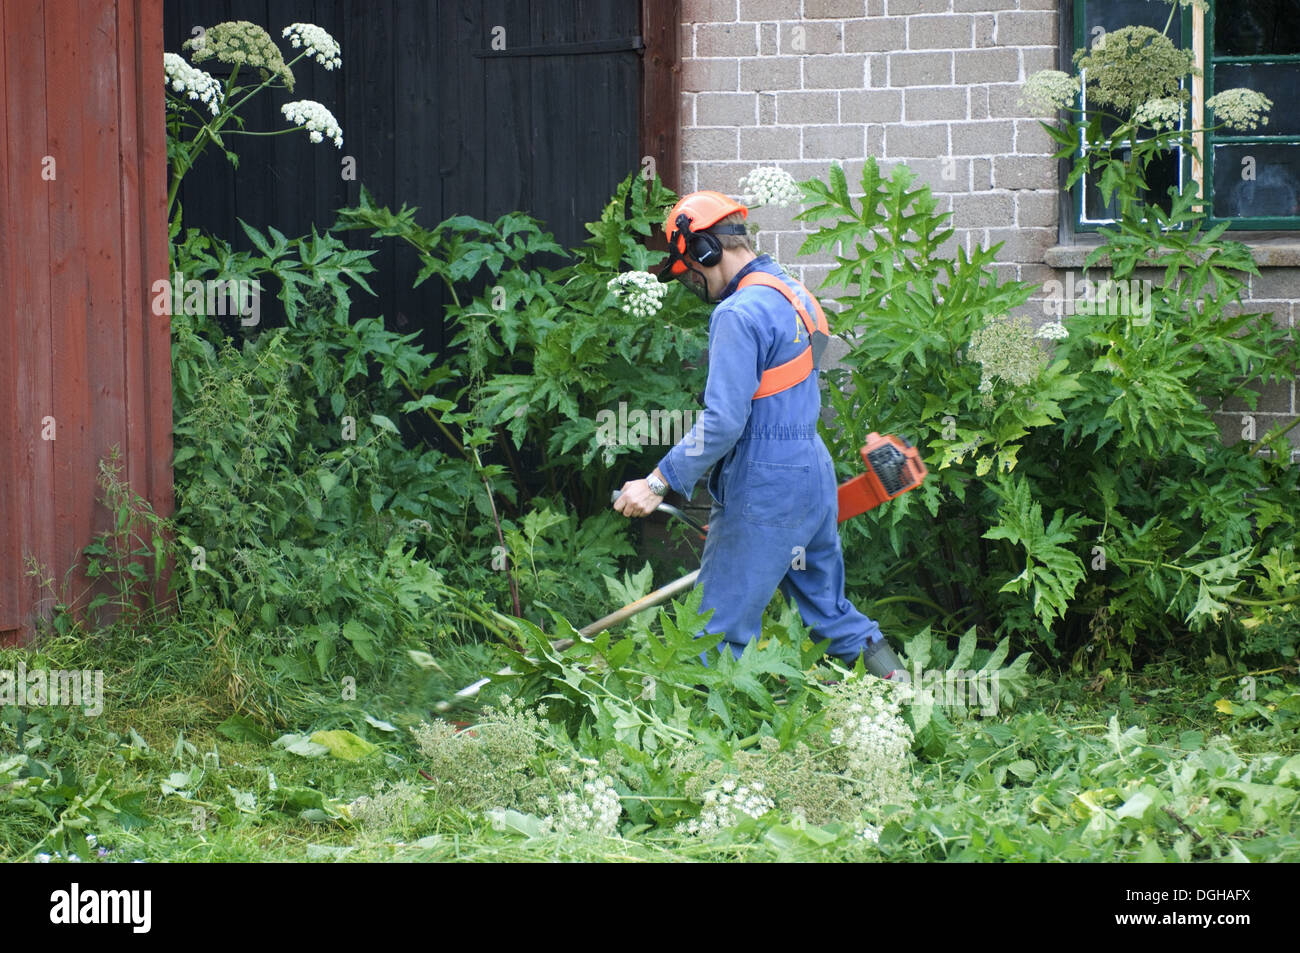 Man using strimmer around farm sheds, cutting back Giant Hogweed (Heracleum mantegazzianum) introduced invasive weed, Sweden Stock Photo